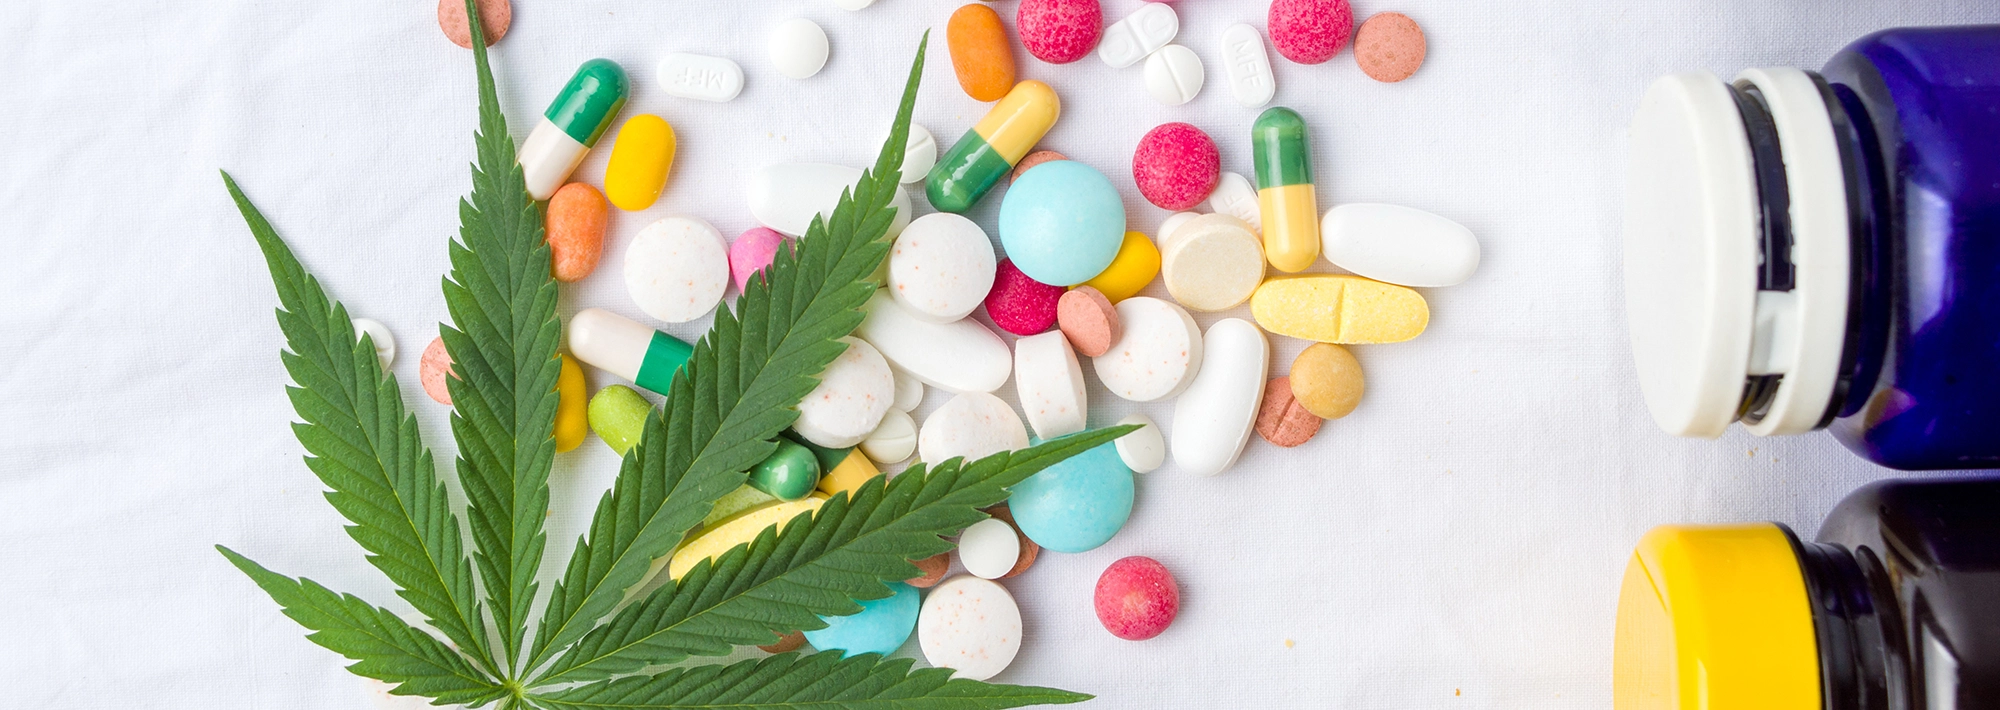 Cannabis leaf with pills and capsules in the background